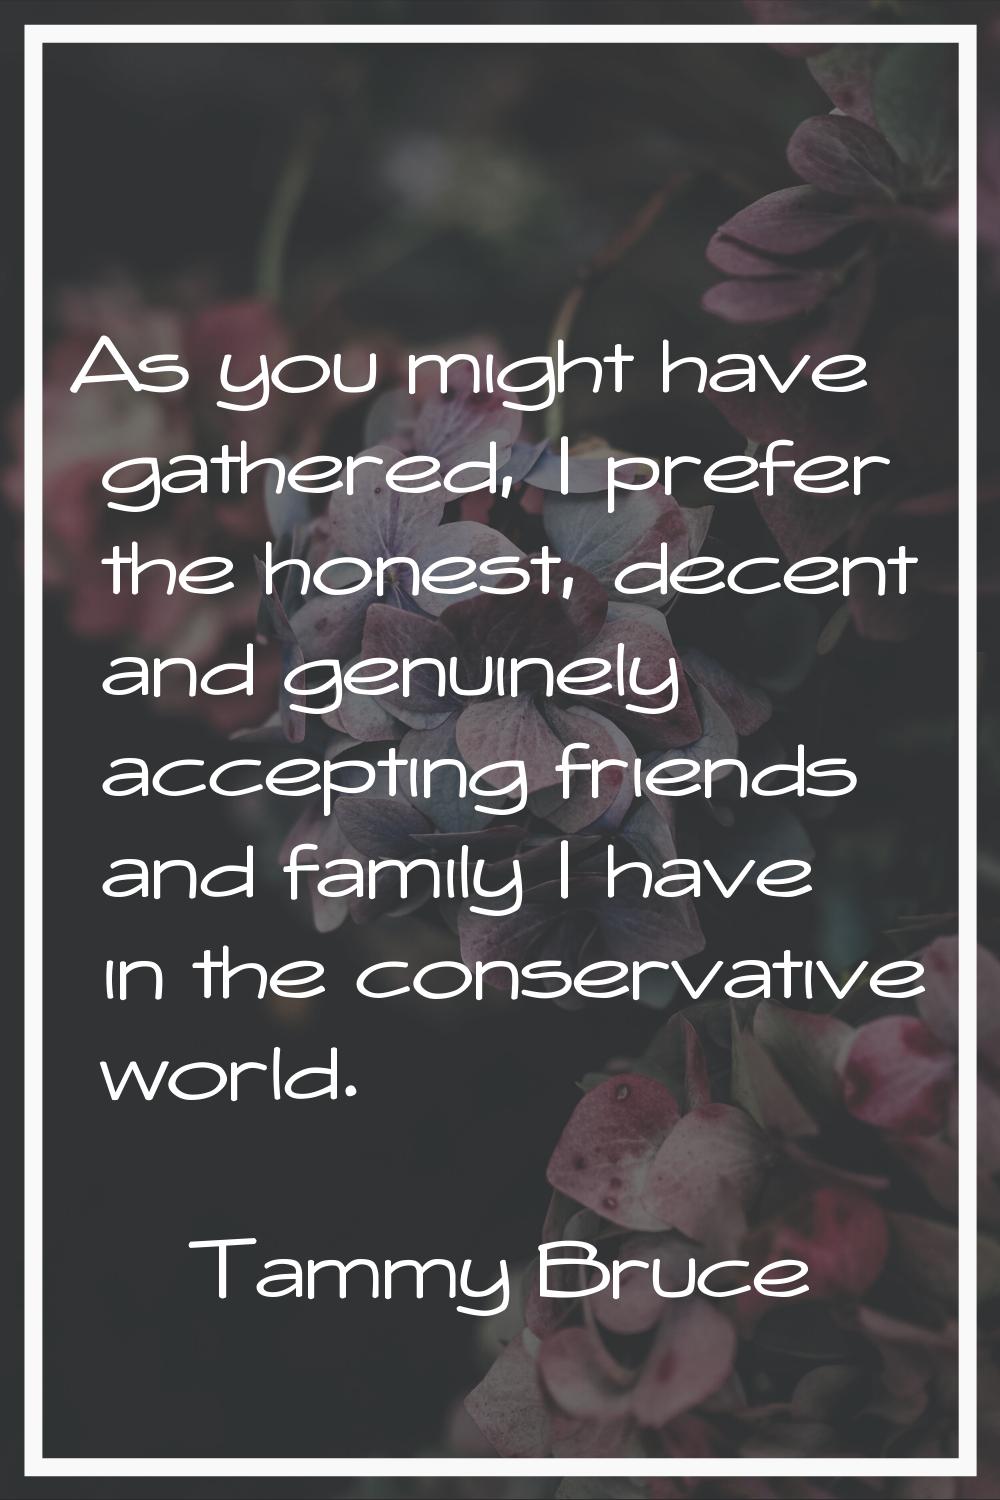 As you might have gathered, I prefer the honest, decent and genuinely accepting friends and family 